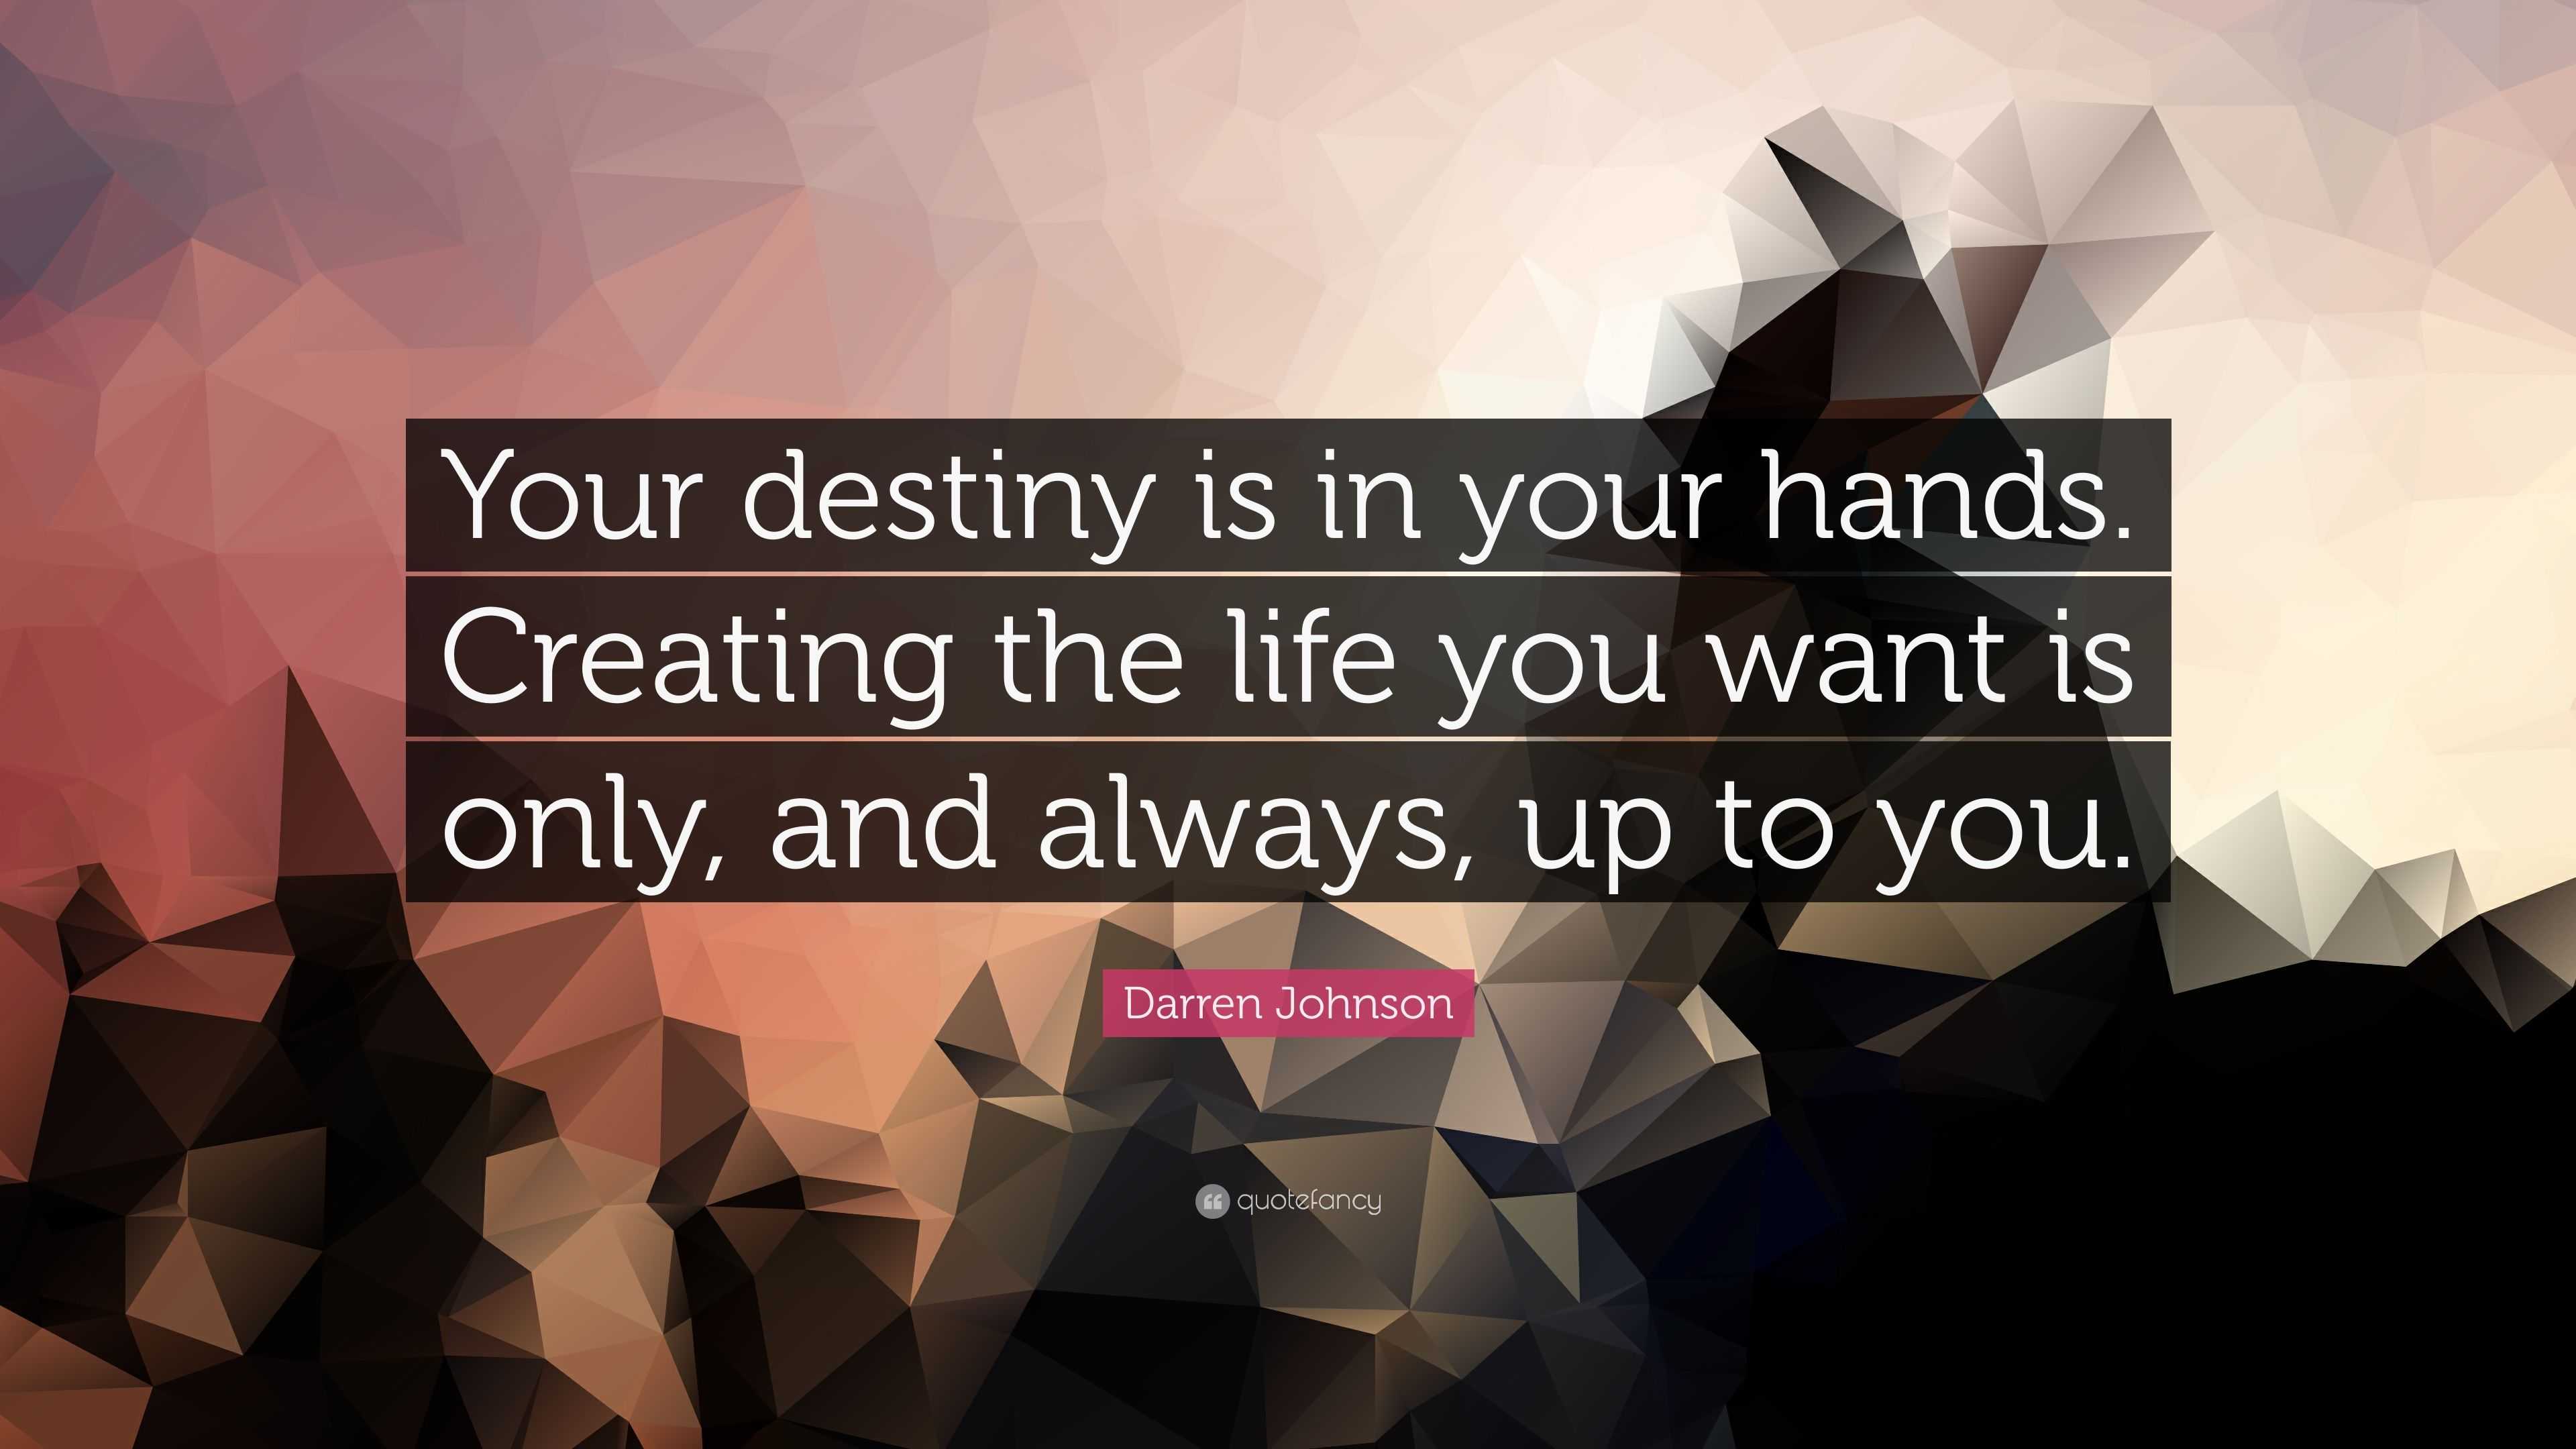 Darren Johnson Quote: “Your destiny is in your hands. Creating the